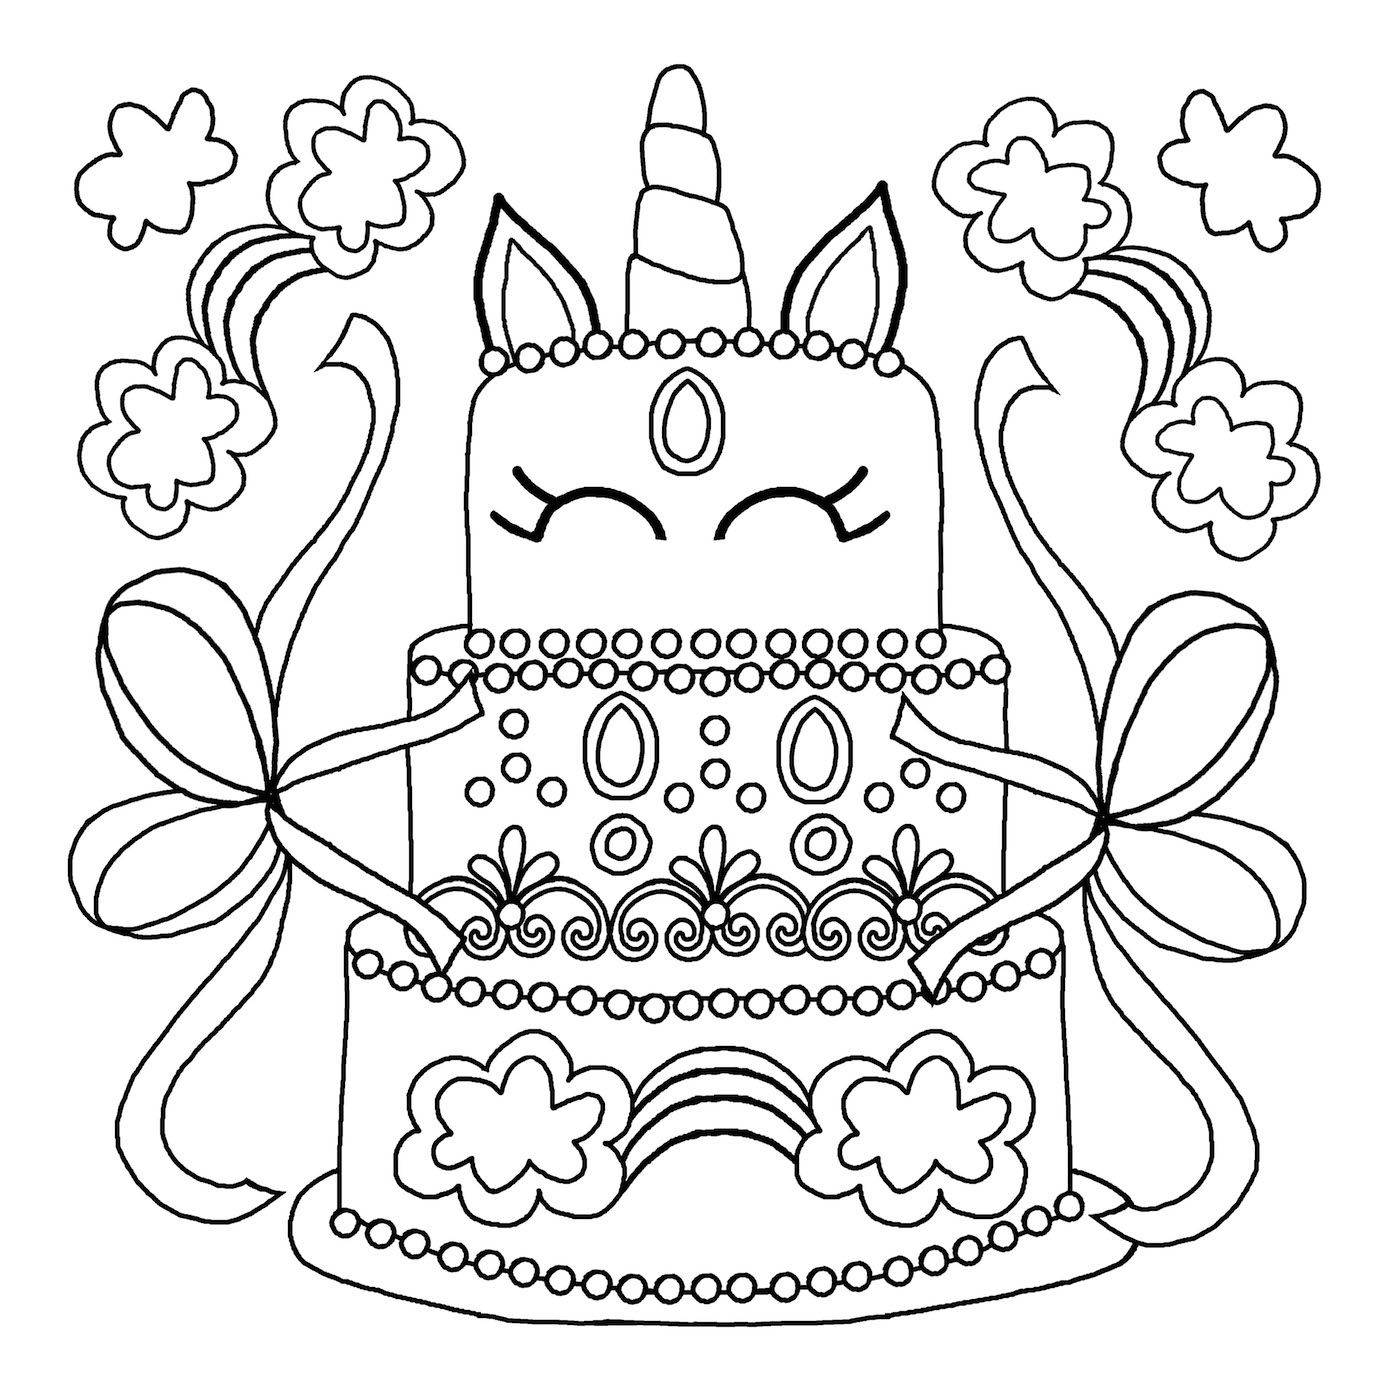 Unicorn Cake Coloring Pages - Coloring Home